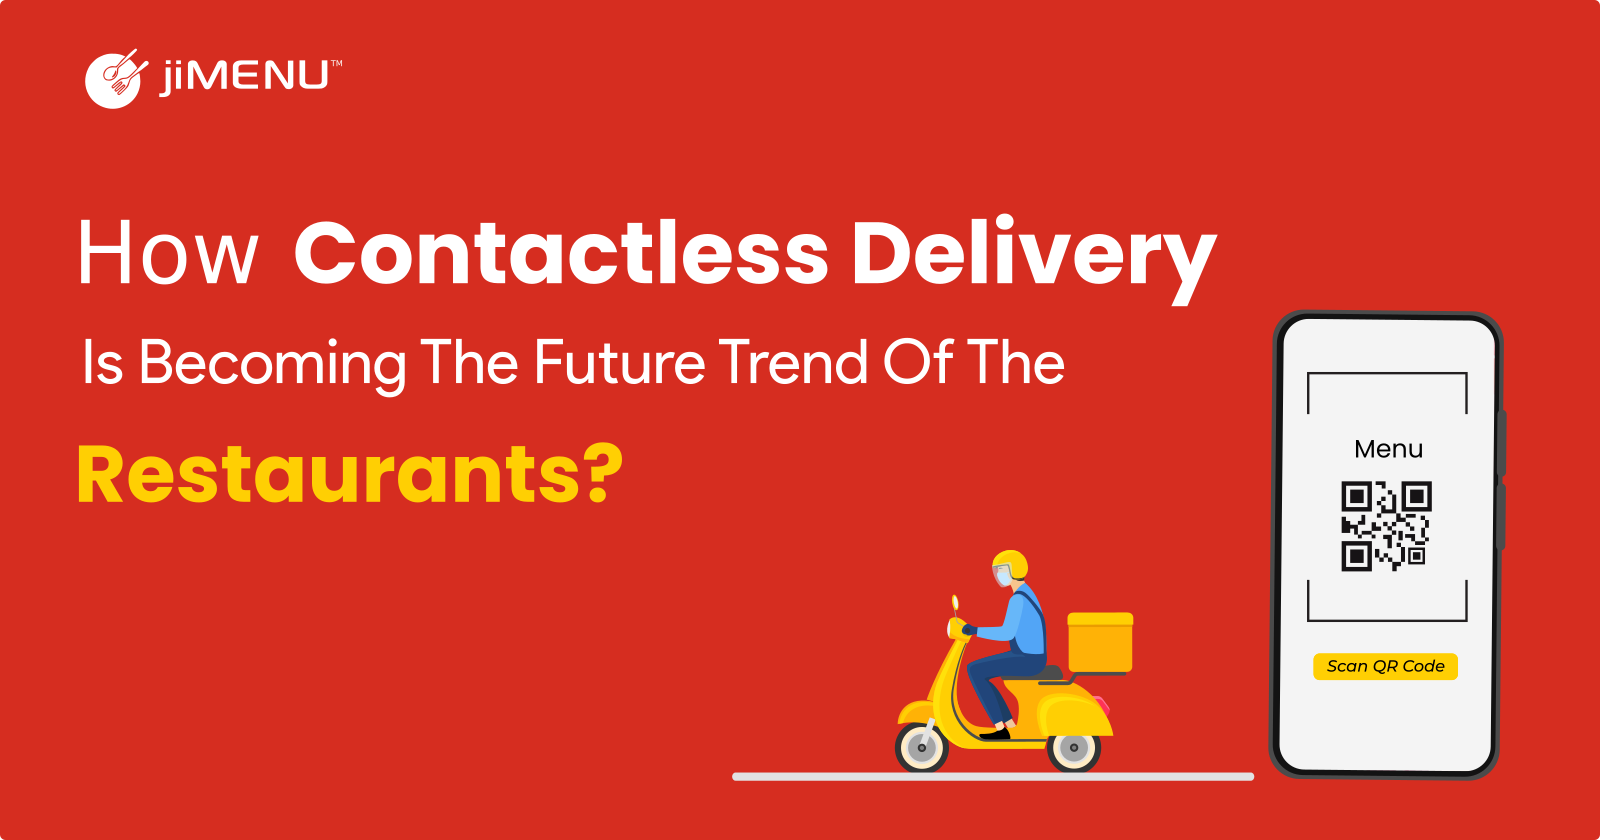 How Contactless Delivery is Becoming the Future Trend of the Restaurants?